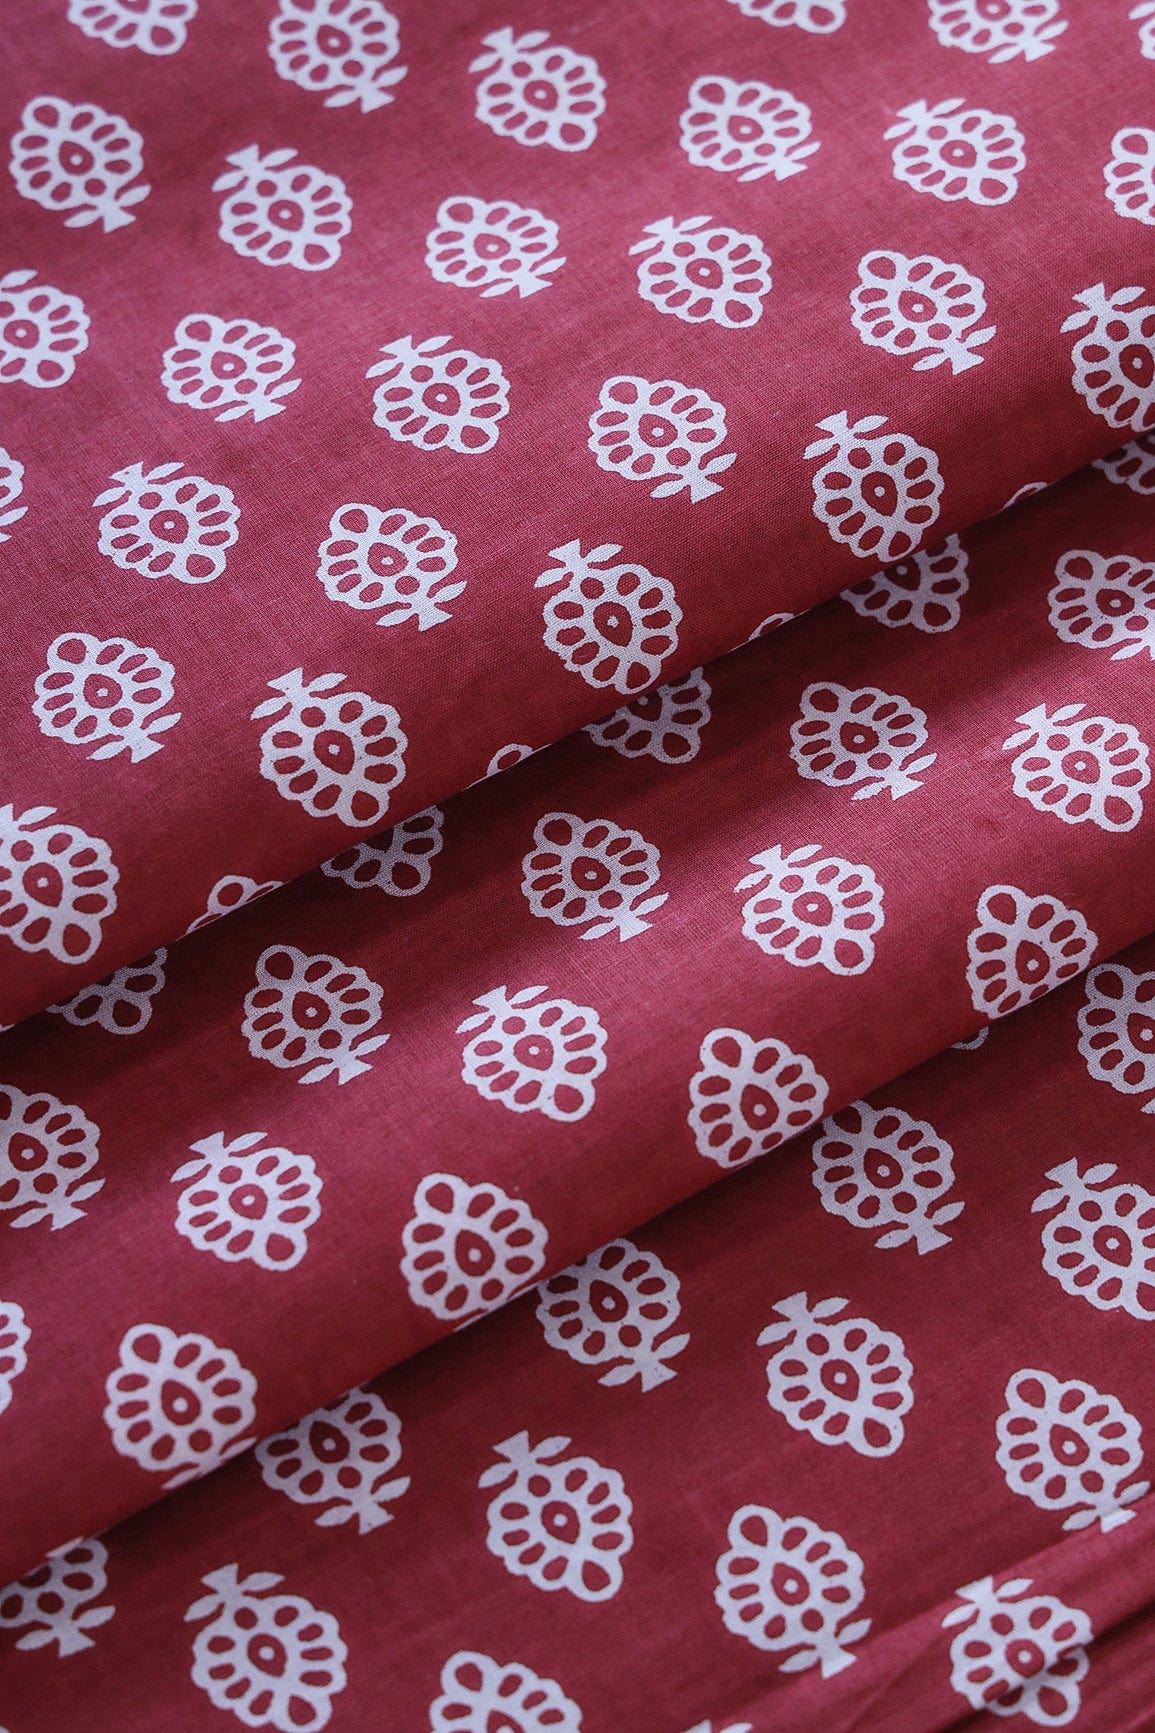 doeraa Prints White Small Floral Booti Pattern Print On Maroon Pure Cotton Fabric